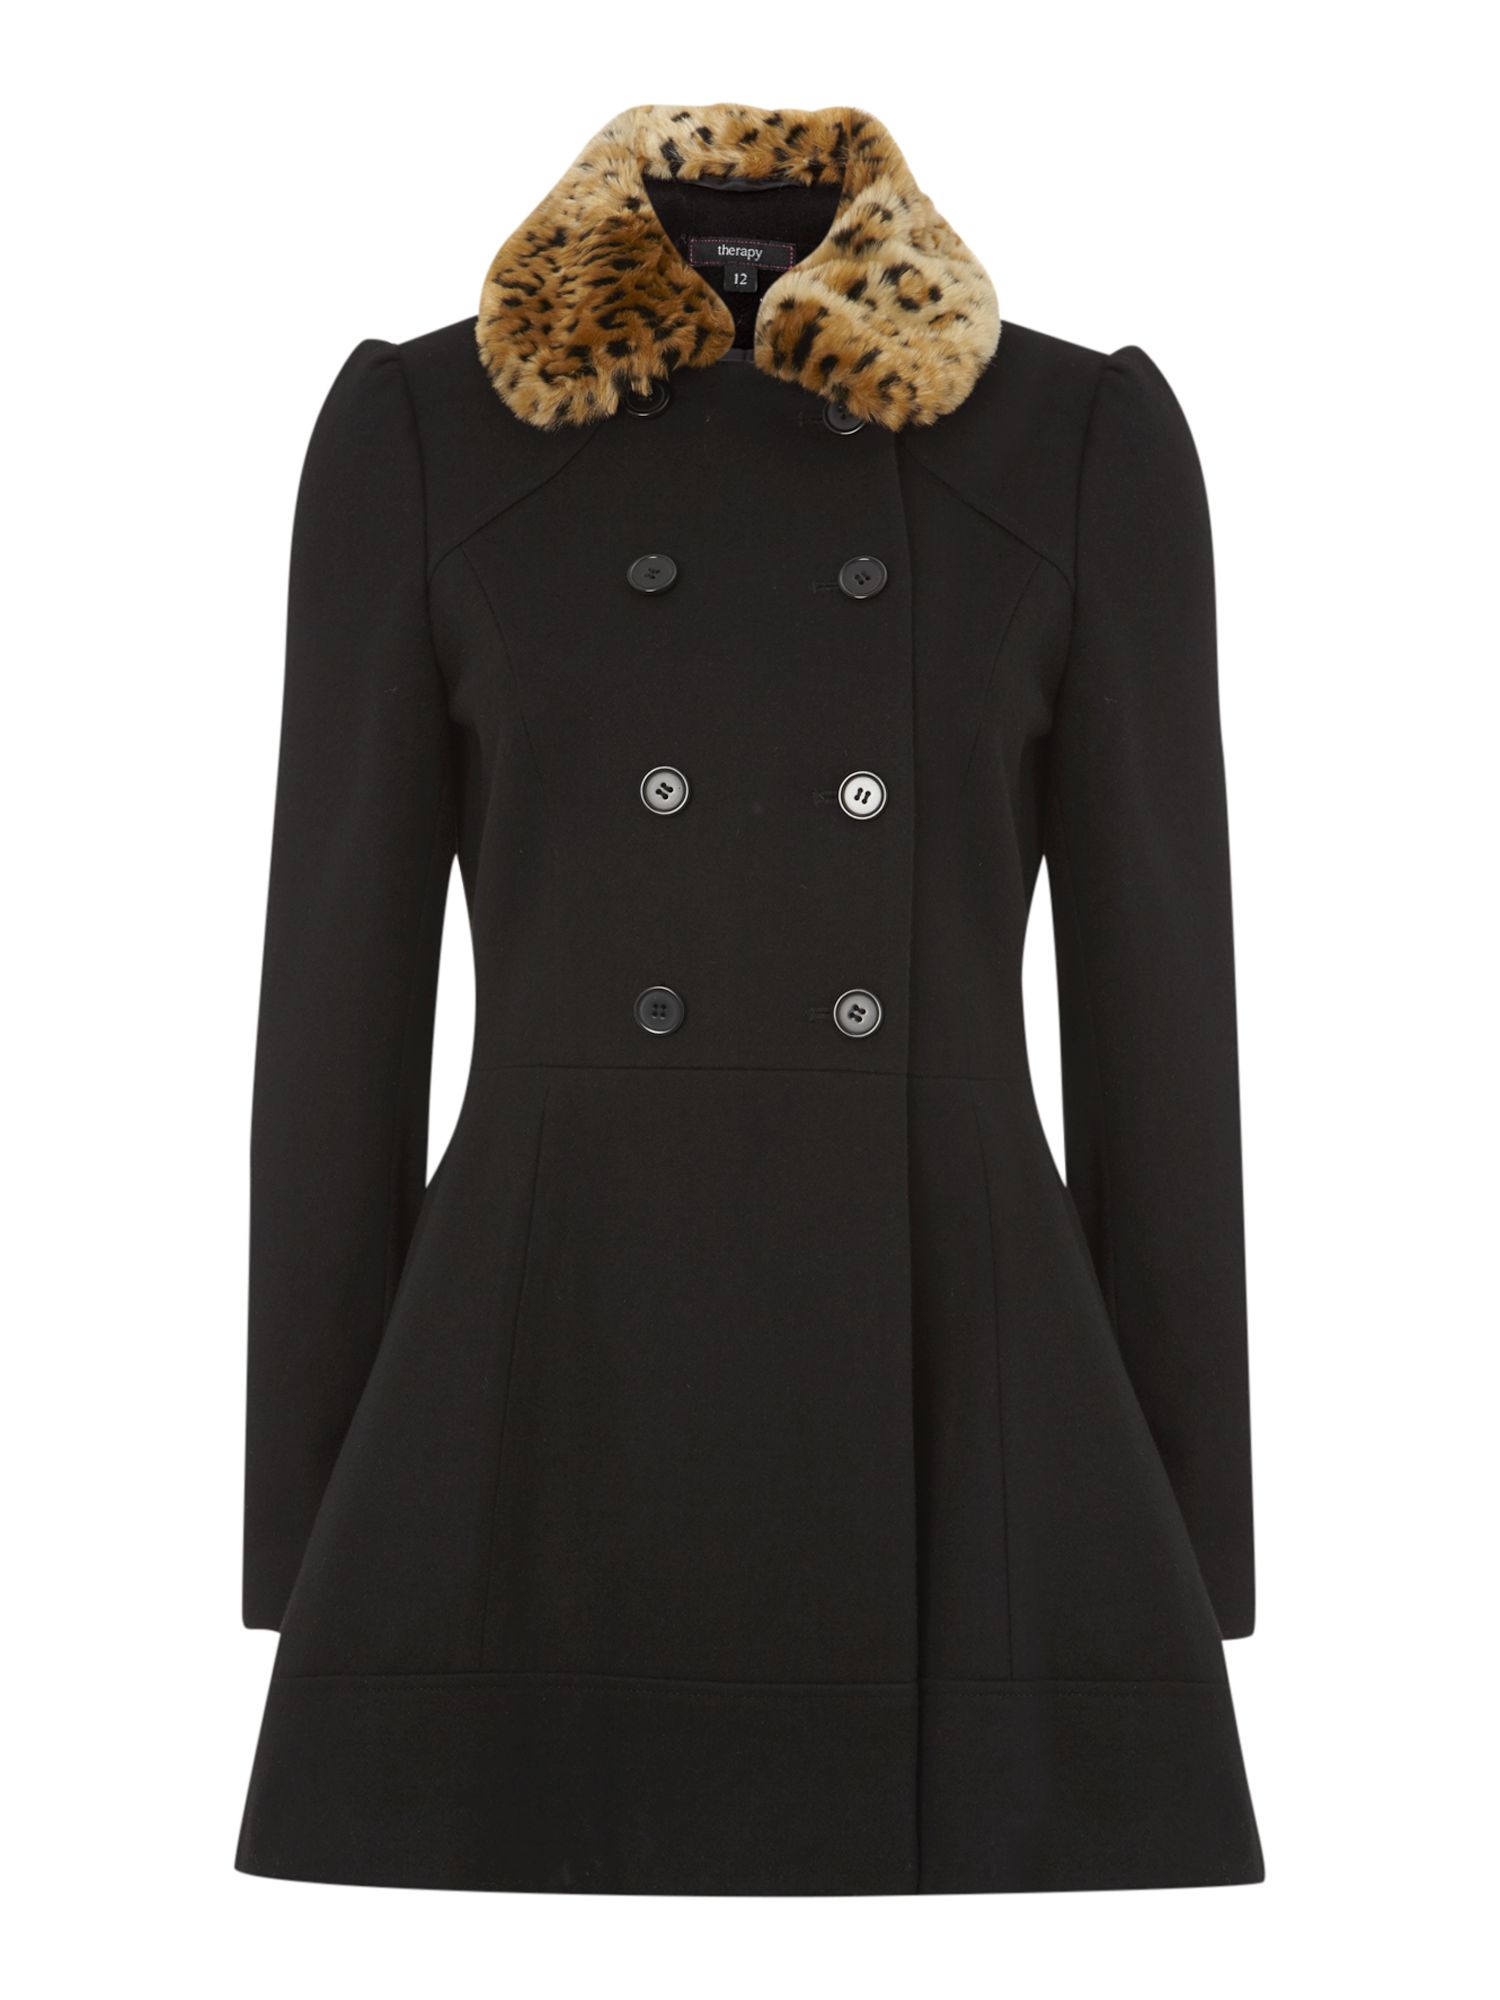 Therapy Leopard Fur Collar Fit and Flare Coat in Black | Lyst